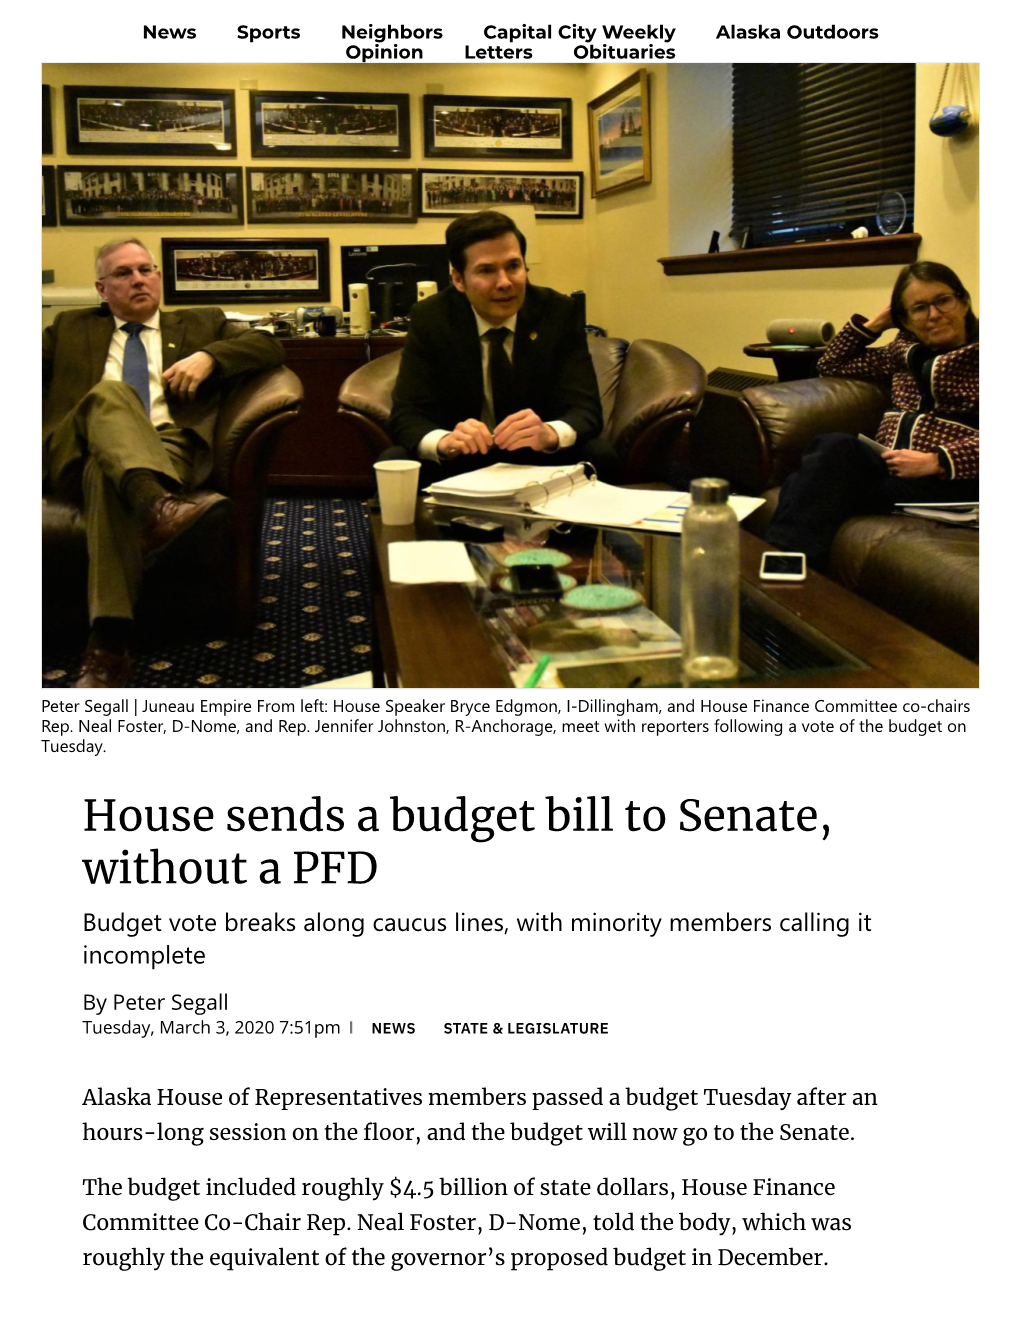 House Sends a Budget Bill to Senate, Without a PFD Budget Vote Breaks Along Caucus Lines, with Minority Members Calling It Incomplete